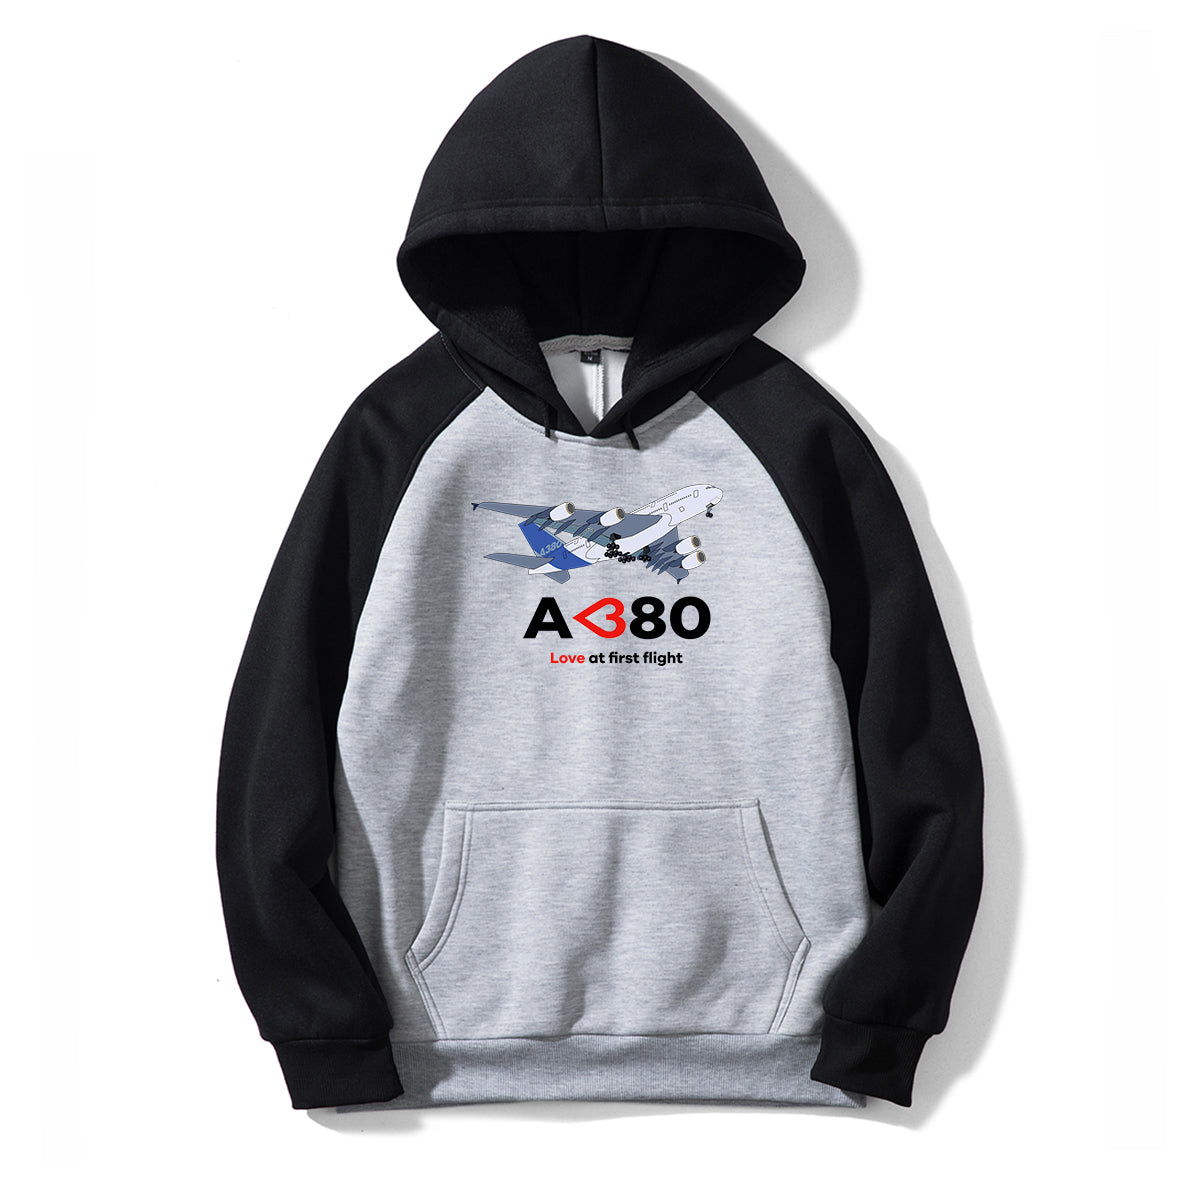 Airbus A380 Love at first flight Designed Colourful Hoodies